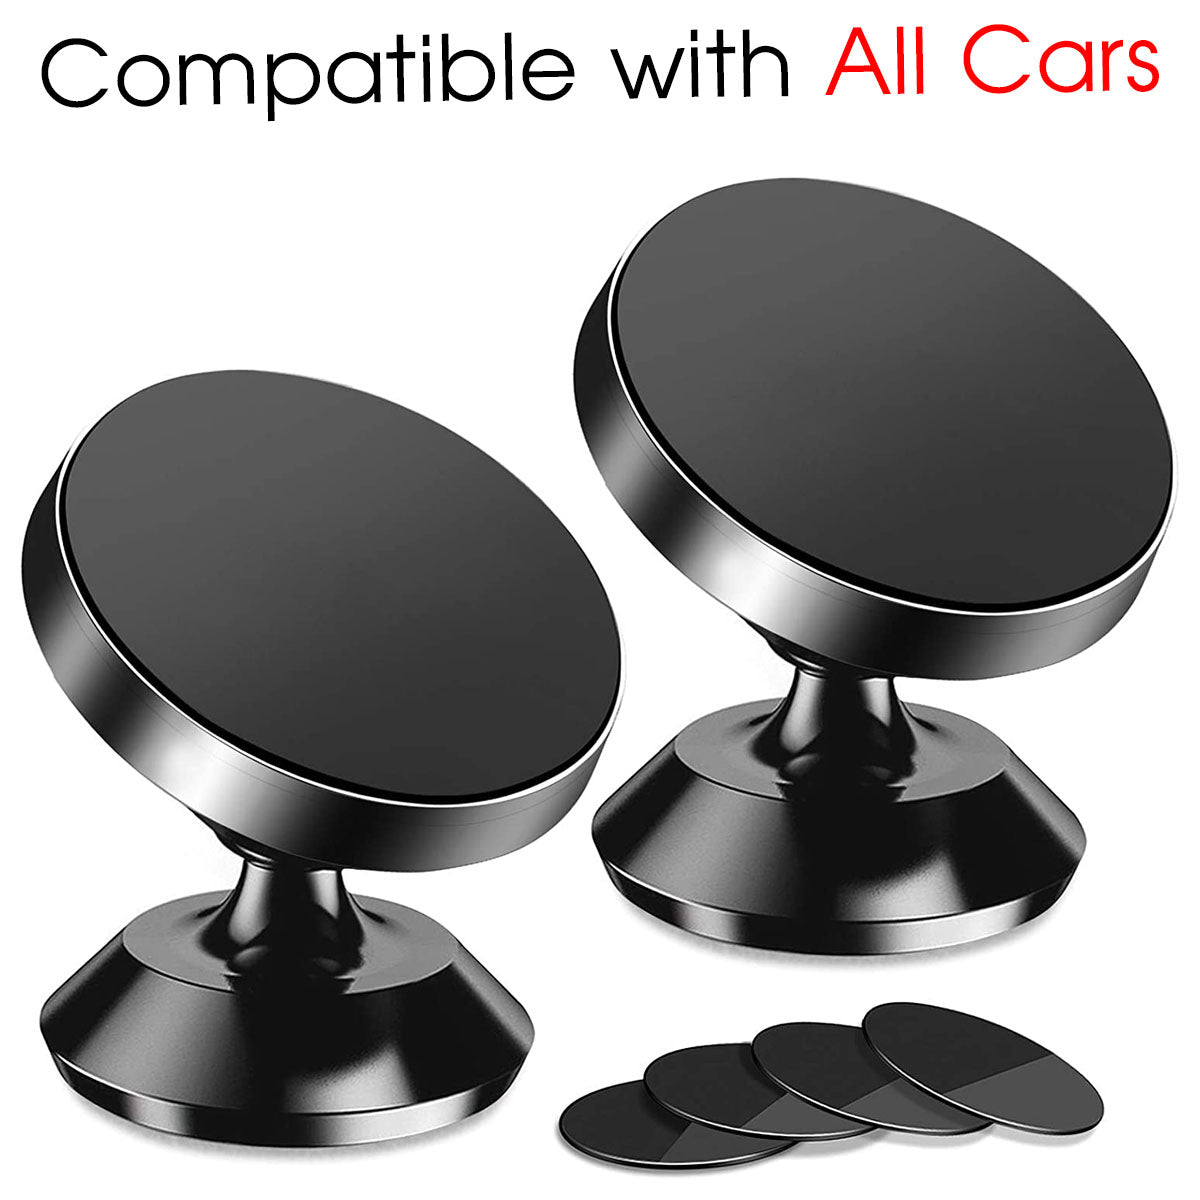 [2 Pack ] Magnetic Phone Mount, Custom For Your Cars, [ Super Strong Magnet ] [ with 4 Metal Plate ] car Magnetic Phone Holder, [ 360° Rotation ] Universal Dashboard car Mount Fits All Cell Phones, Car Accessories TS13982